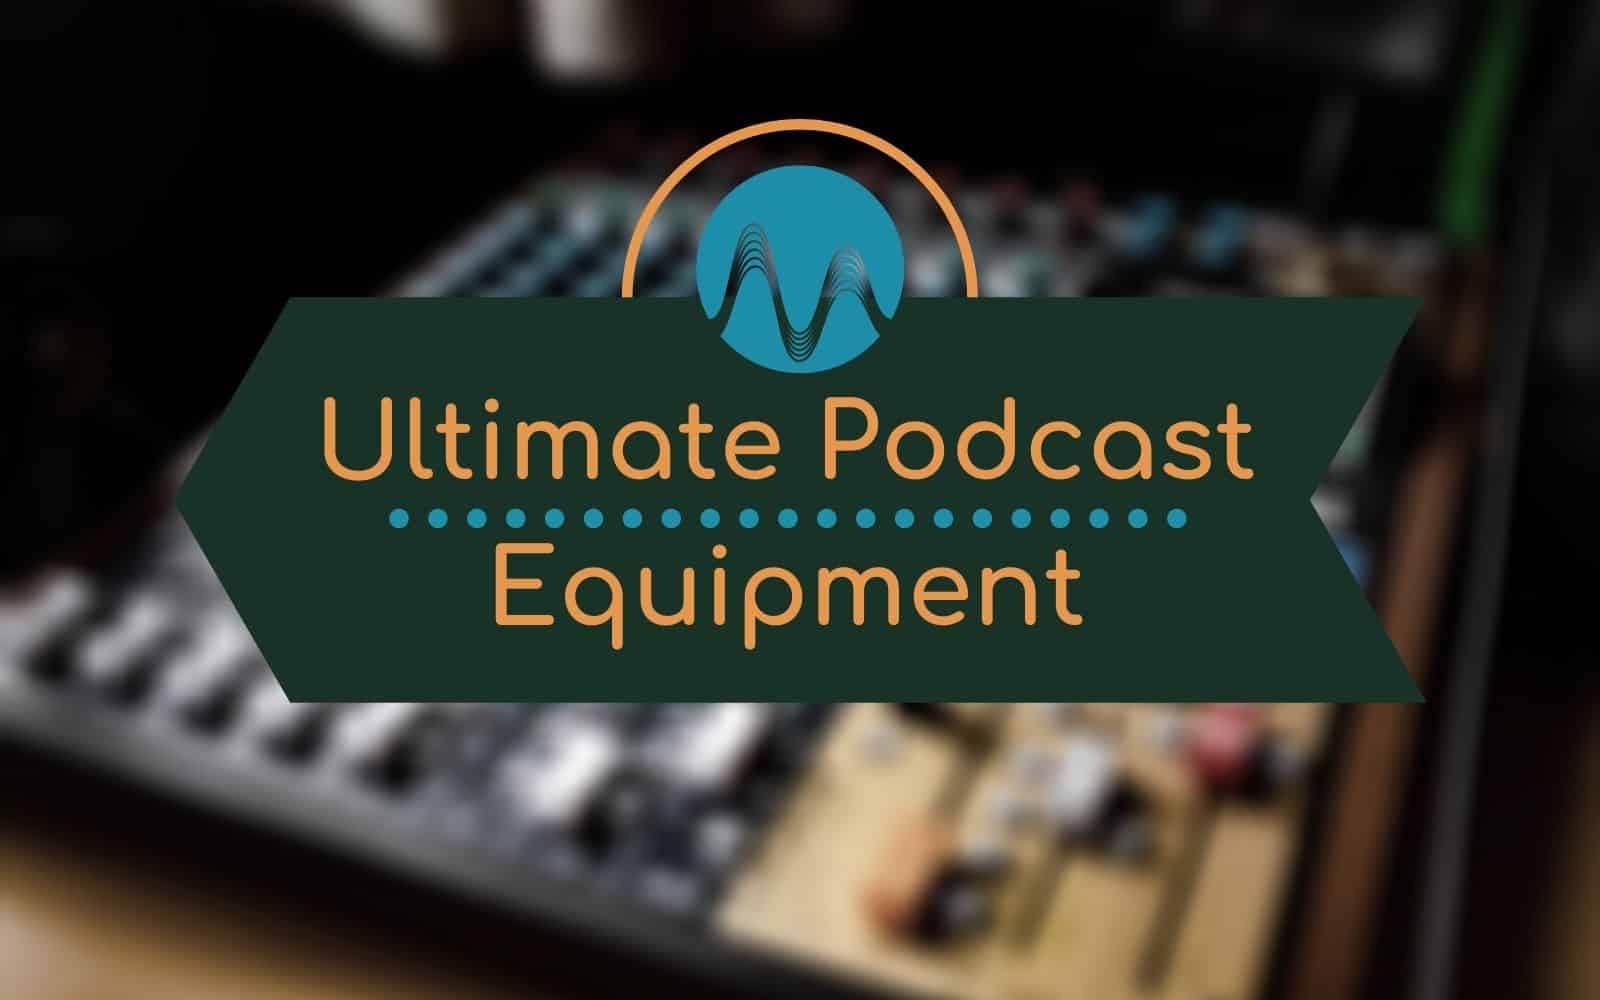 Ultimate Podcast Equipment for 2021 Audio Quality podcast equipment Music Radio Creative